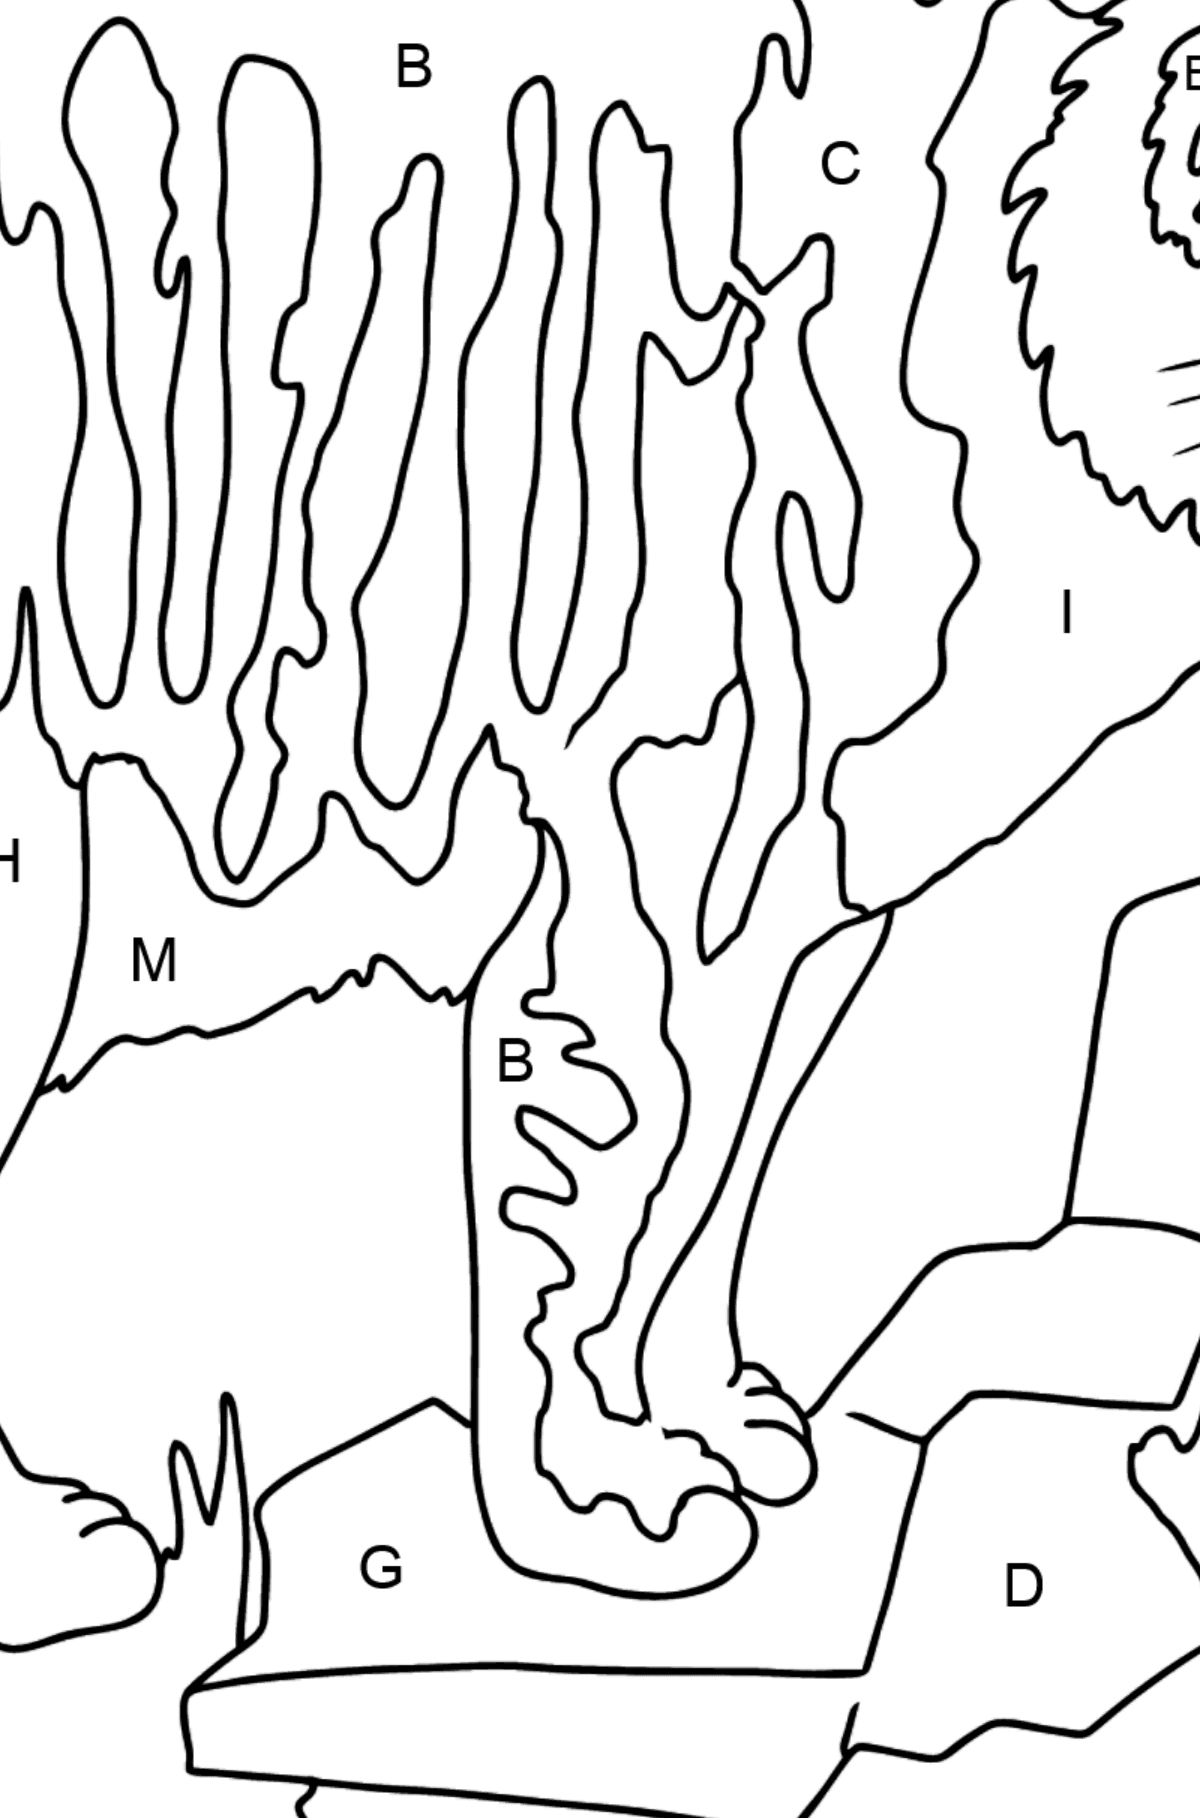 Coloring Page - A Tiger is Looking for Prey - Coloring by Letters for Kids